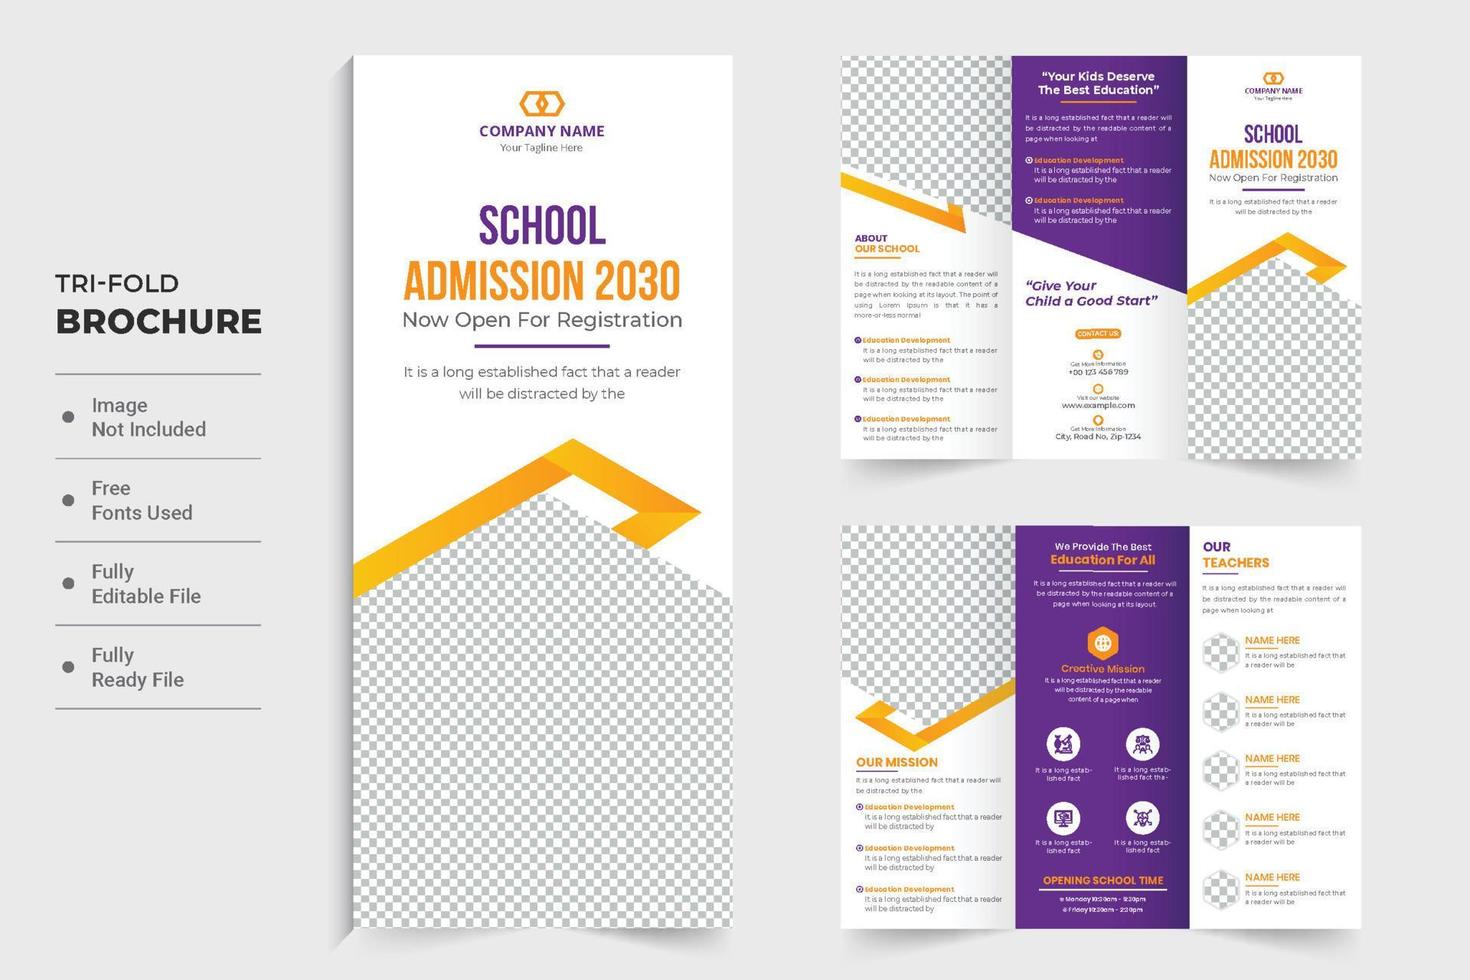 Academic education promotional brochure template for school or university. Back to school trifold brochure design with yellow and purple colors. School admission and activities brochure layout. vector